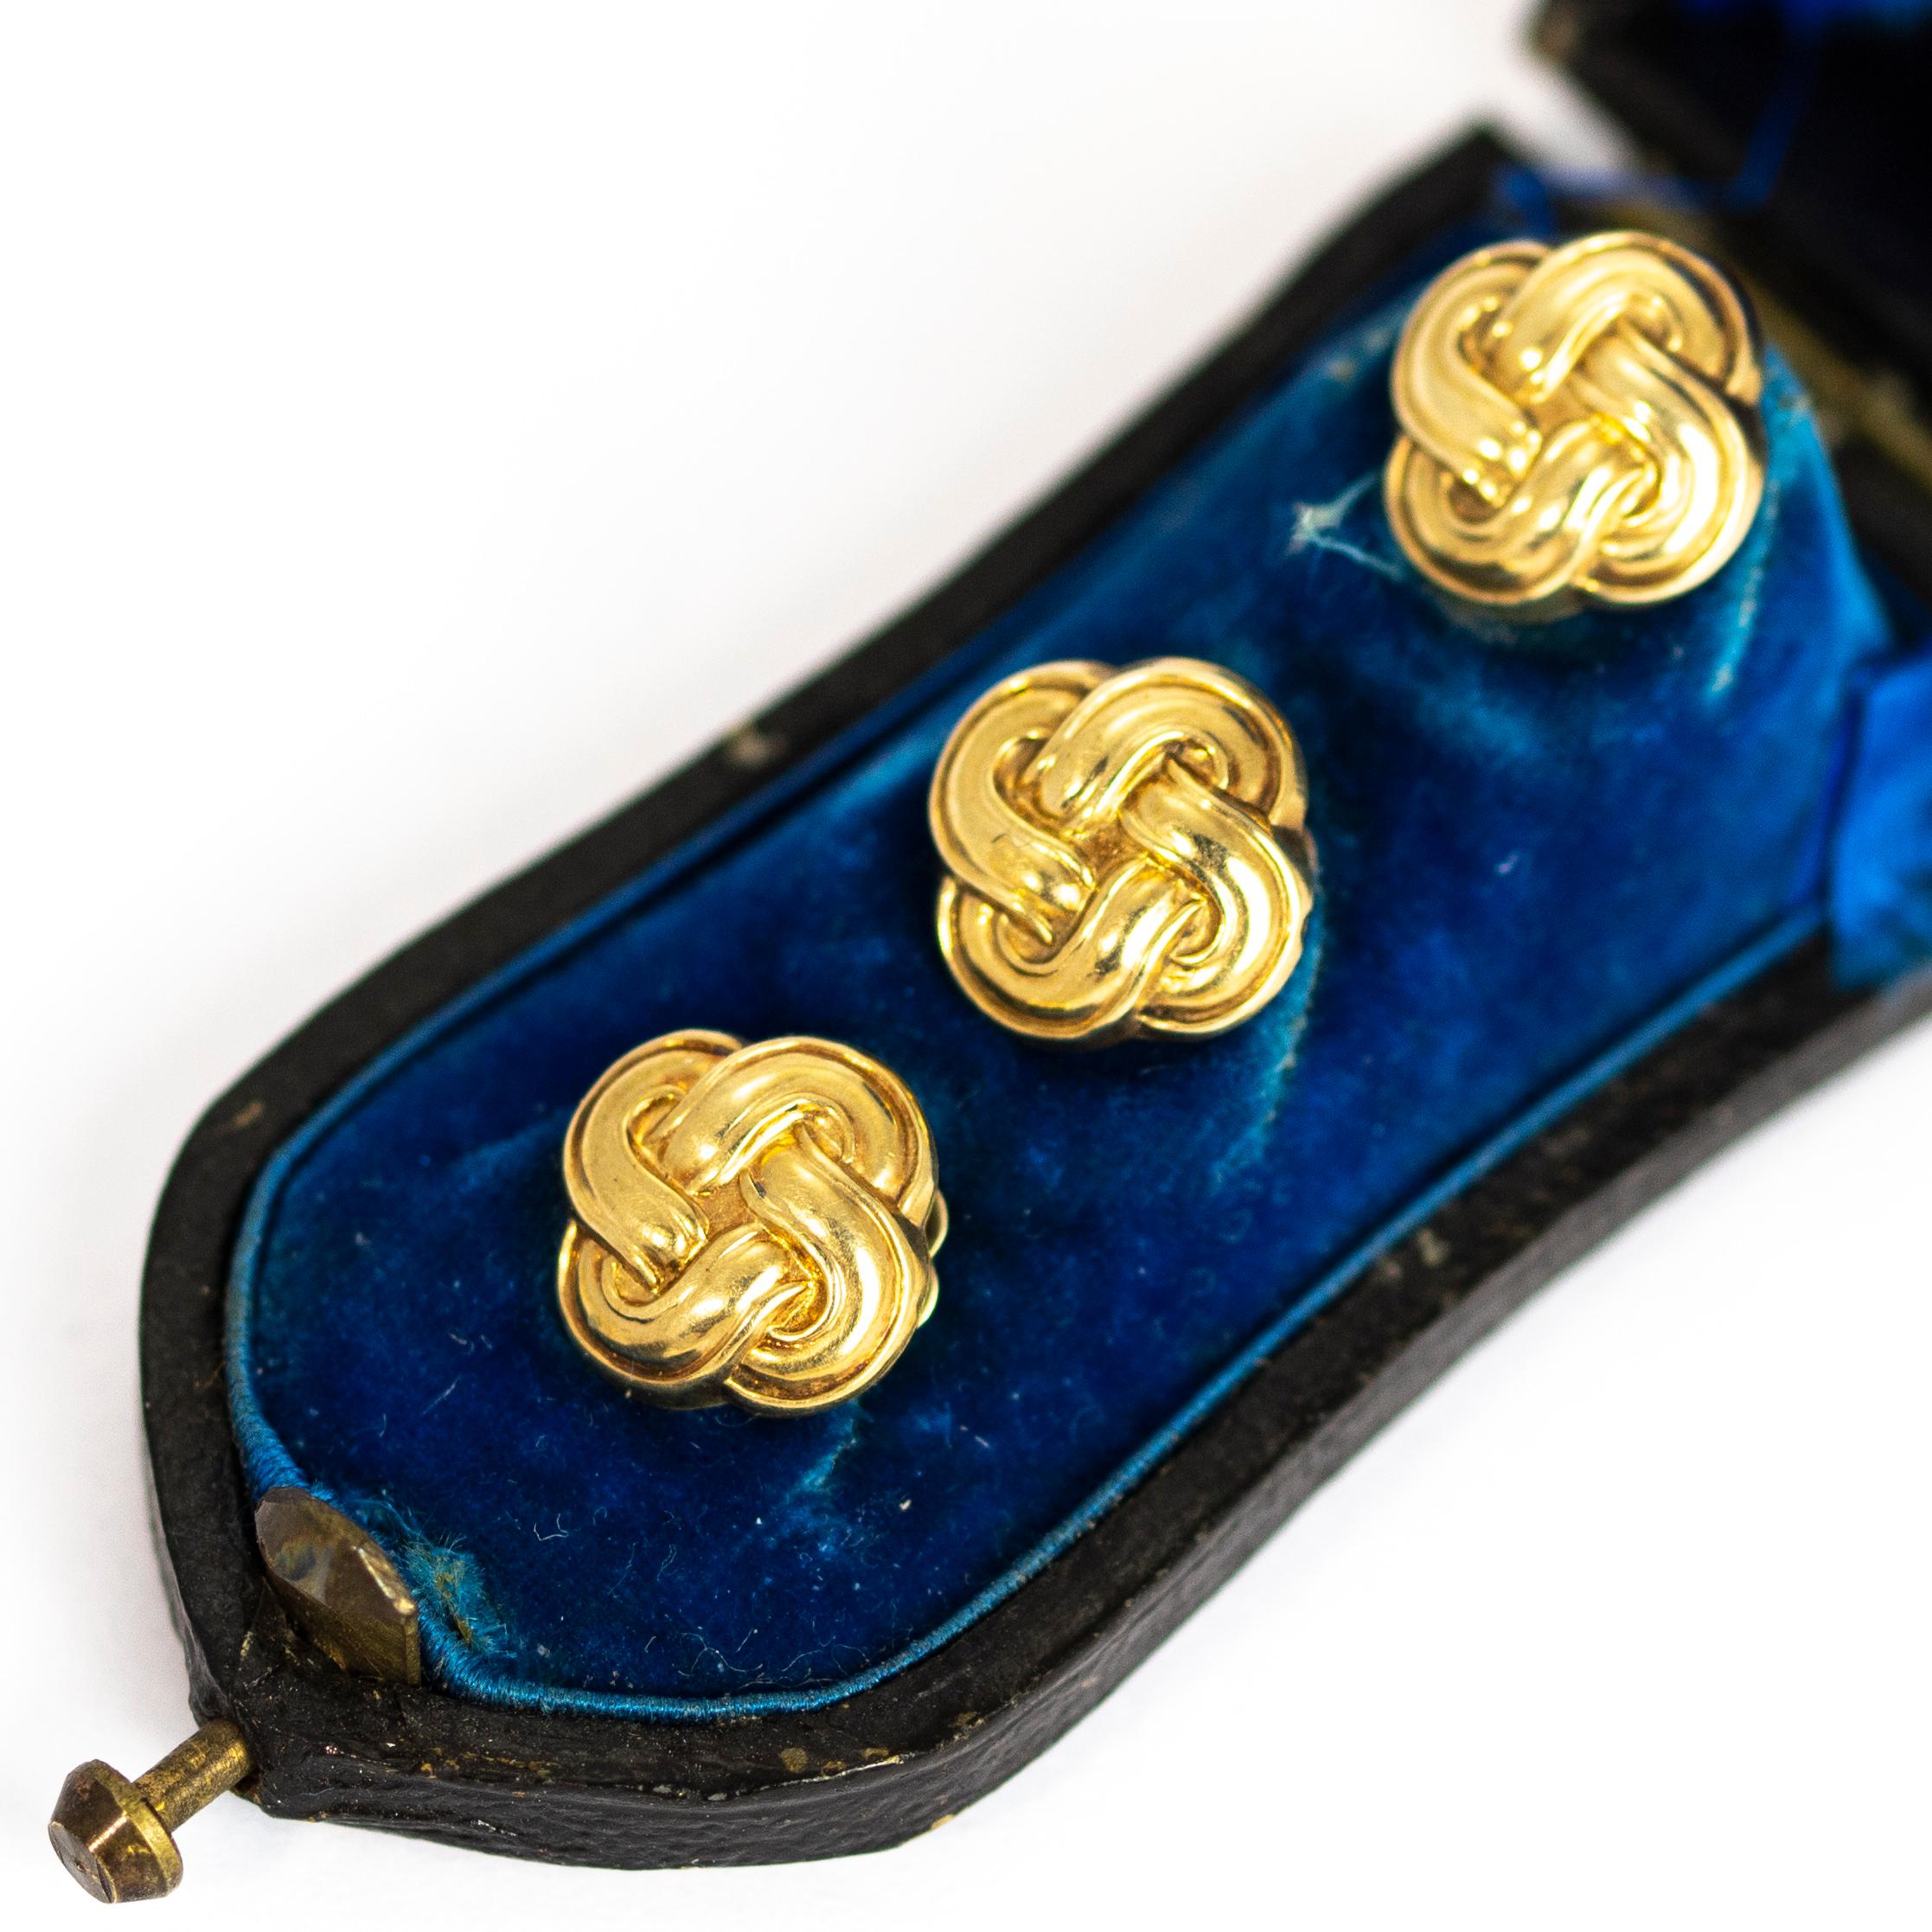 A wonderful trio of antique Victorian shirt studs elegantly formed into twisting lover's knots motifs. The backs are delicately hand chased with beautiful flowers and leaves, each with a different design. Modelled in 9 carat yellow gold. Set in